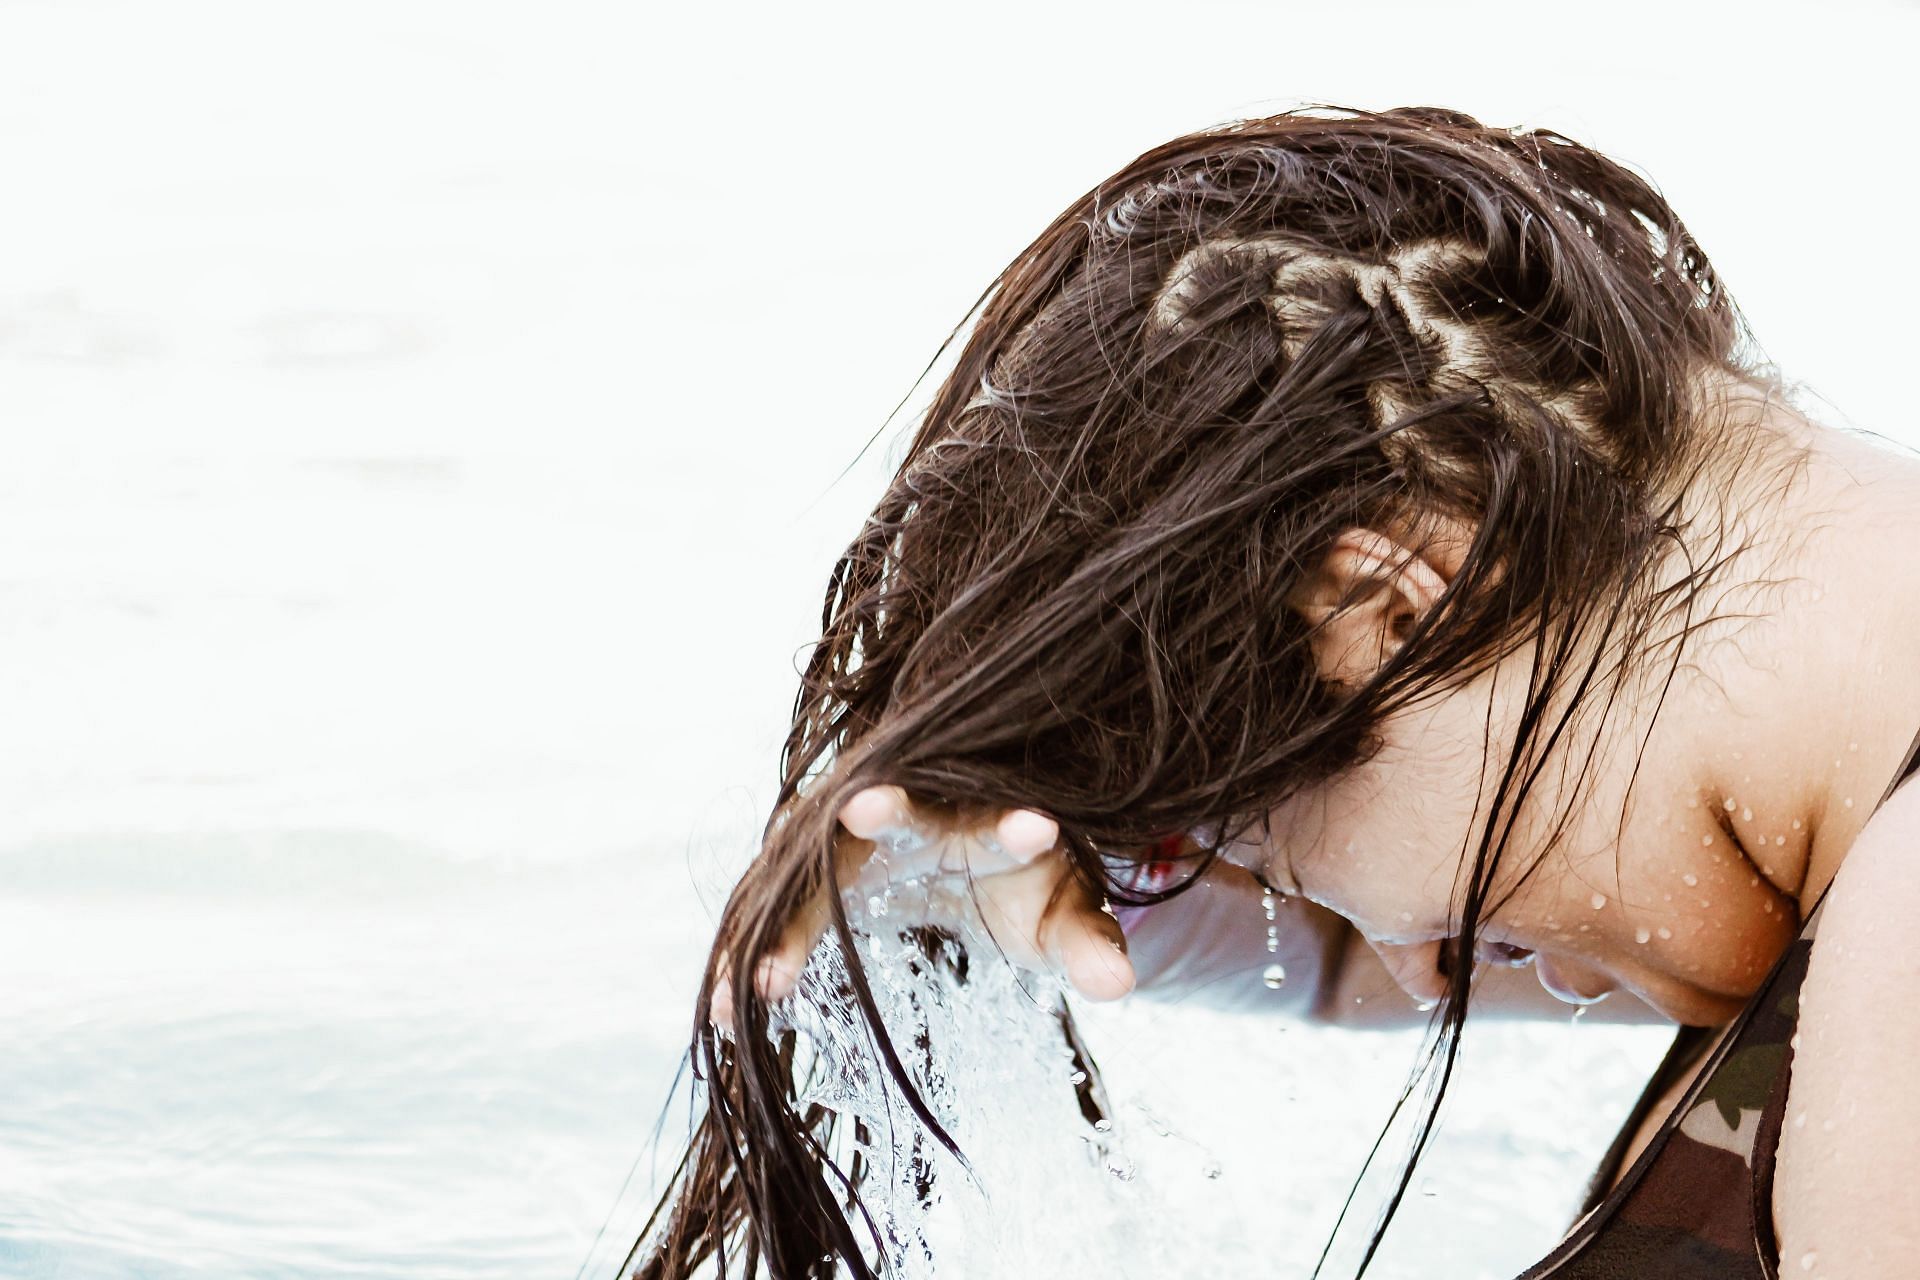 Hard water and hair can be a harmful combination for your hair health. (Image via Unsplash/ Erick Lareegui)